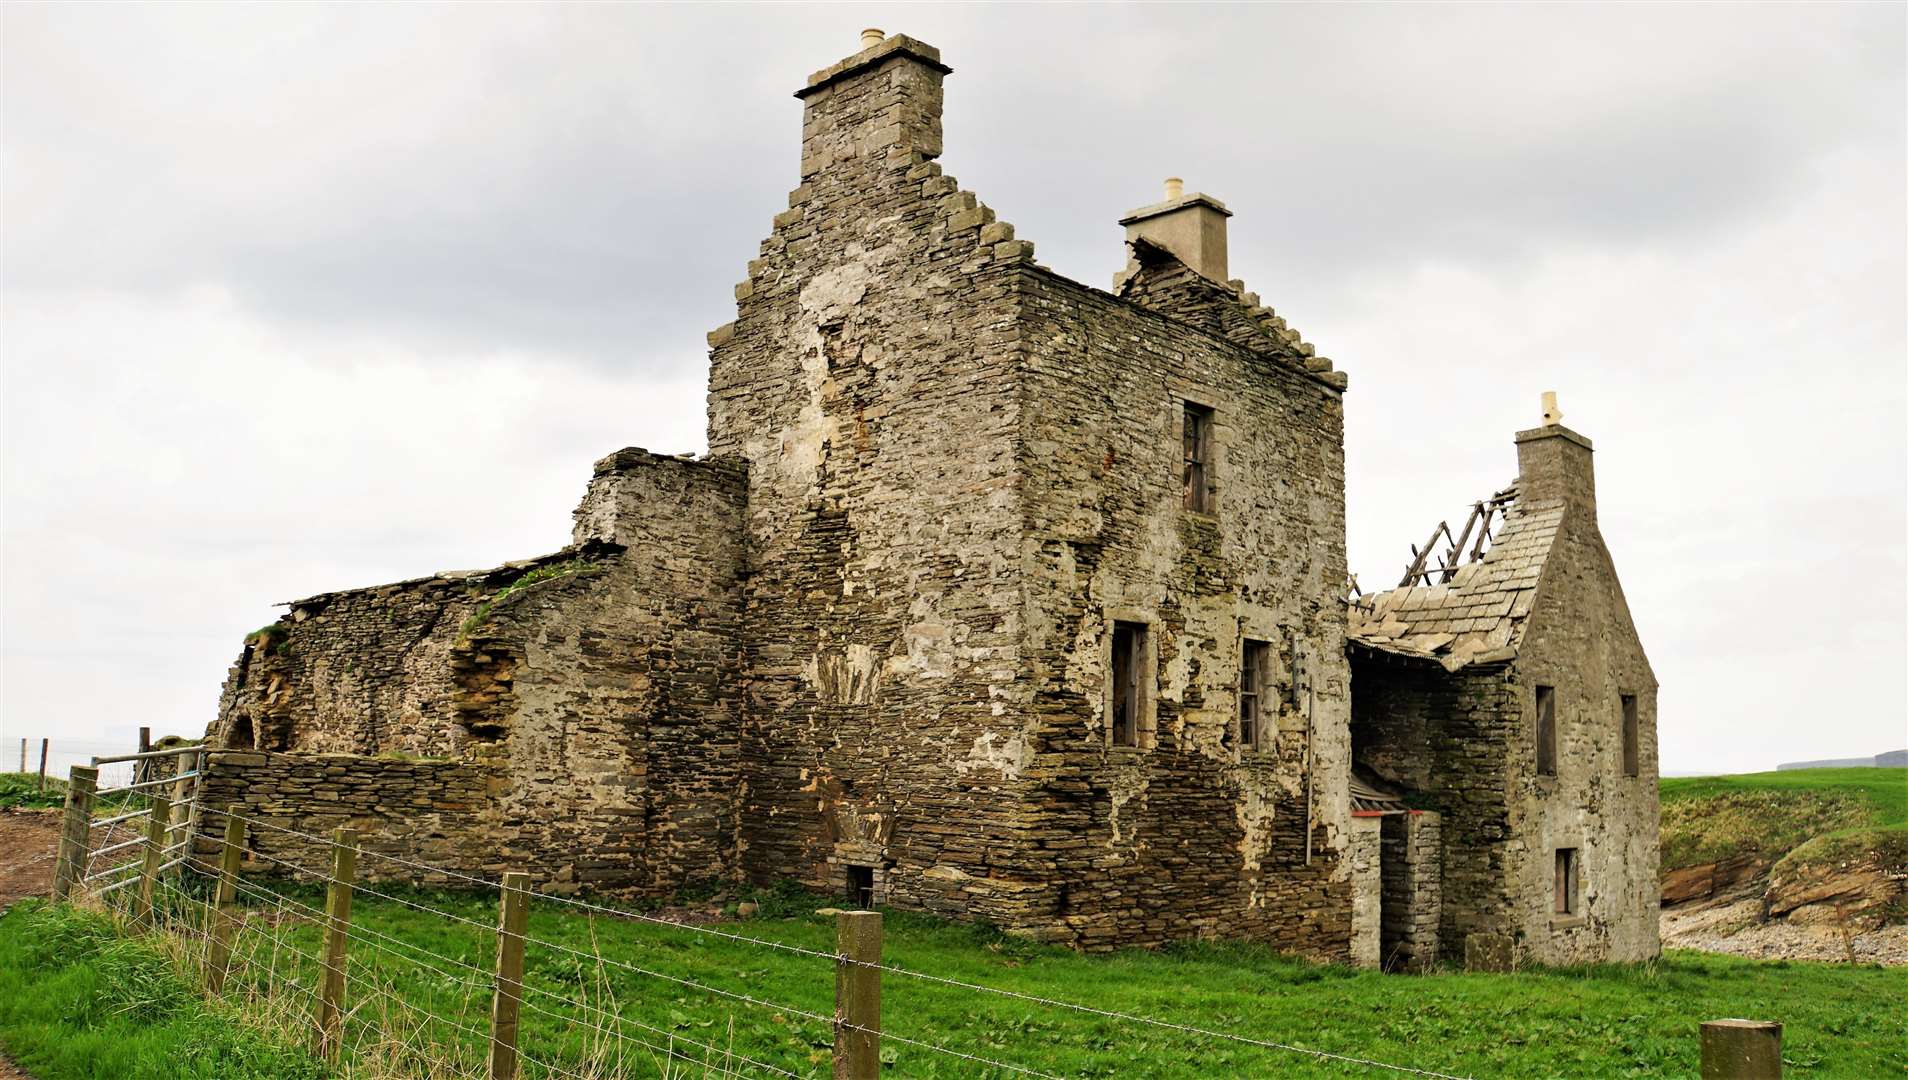 Brims Castle is in a ruinous state despite being habitable in the 1980s. Picture: DGS